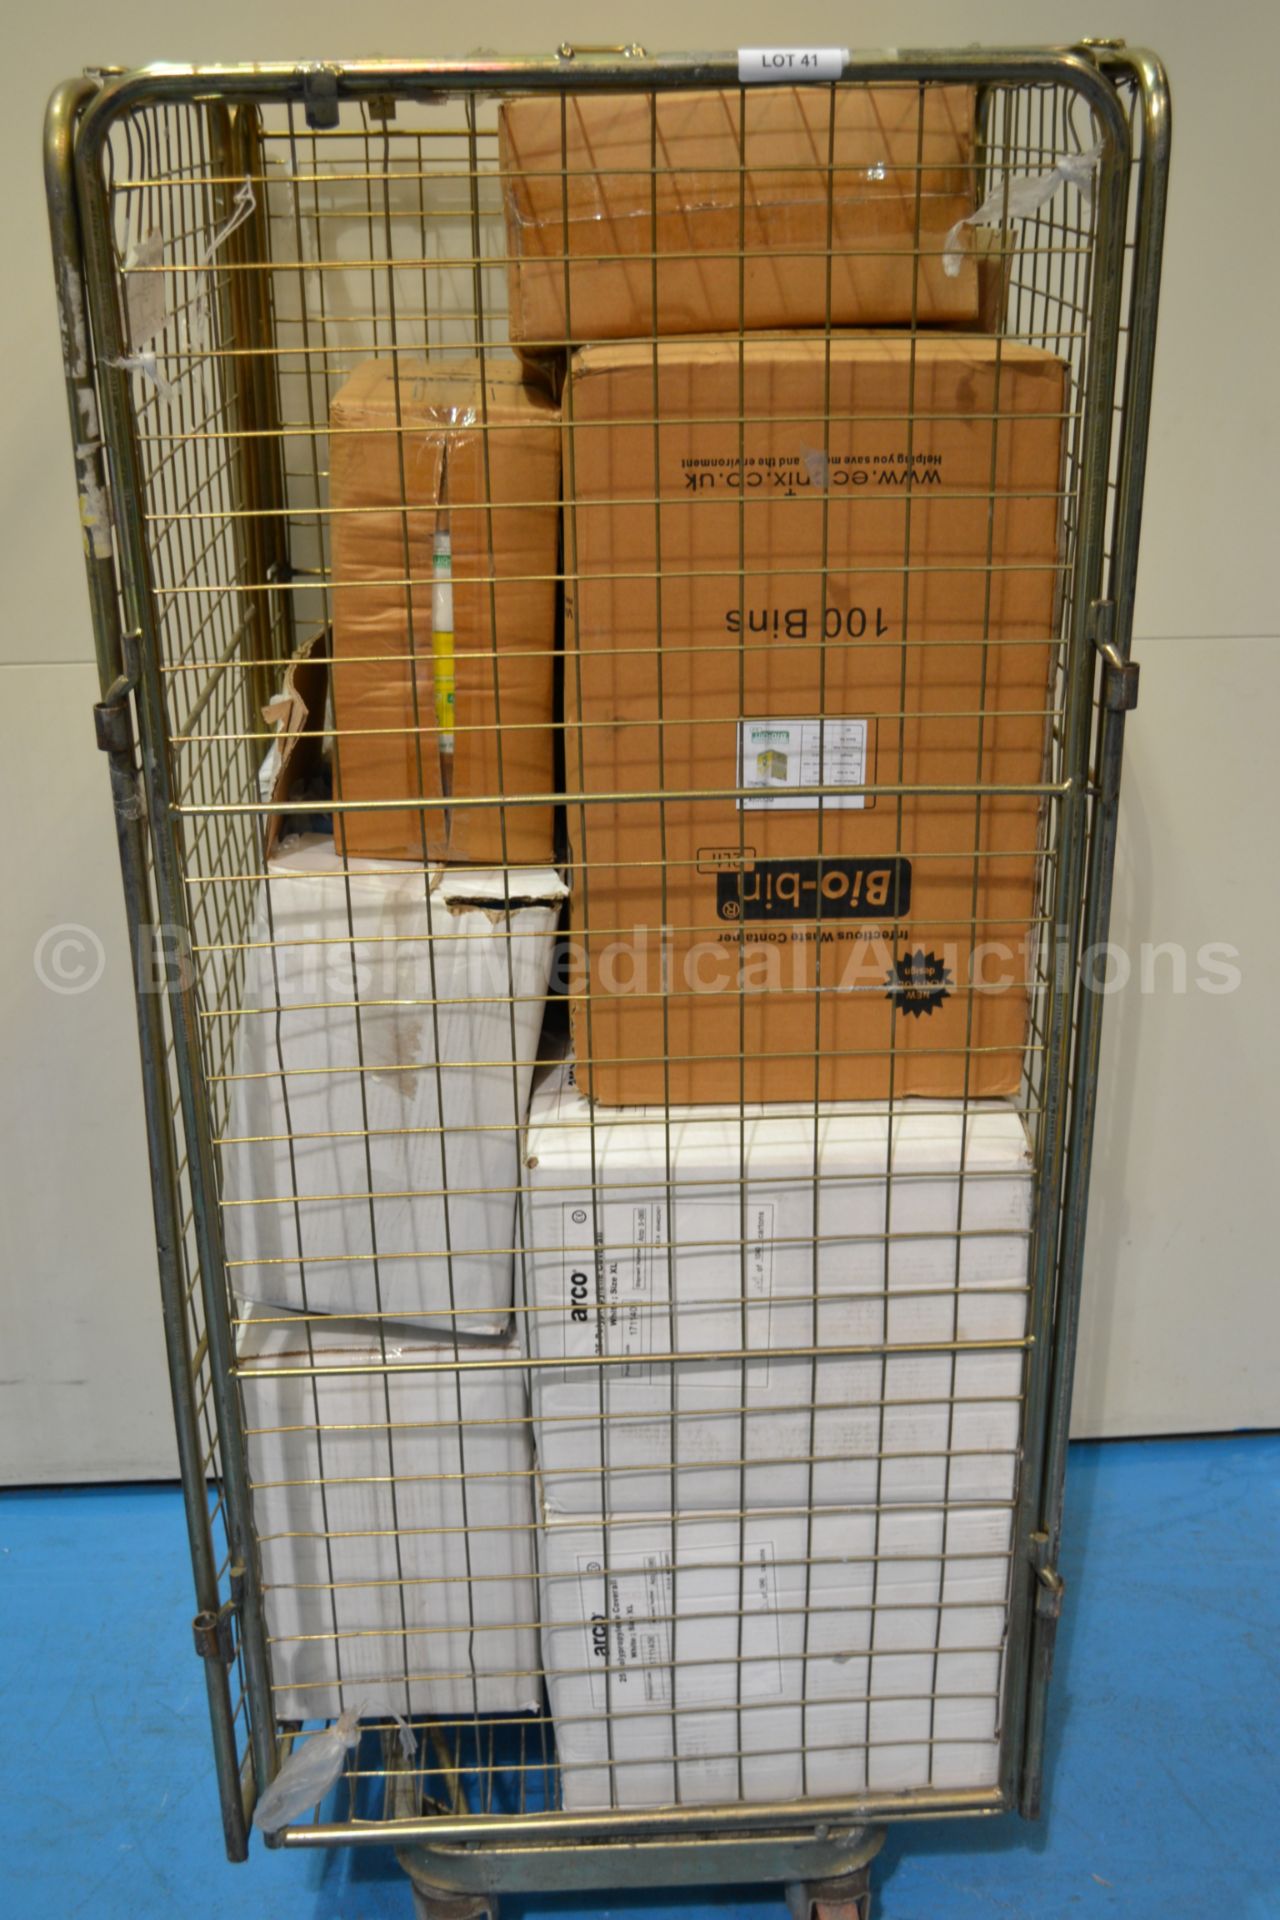 Cage of 2Ltr Bio-Bin Infectious Waste Containers a